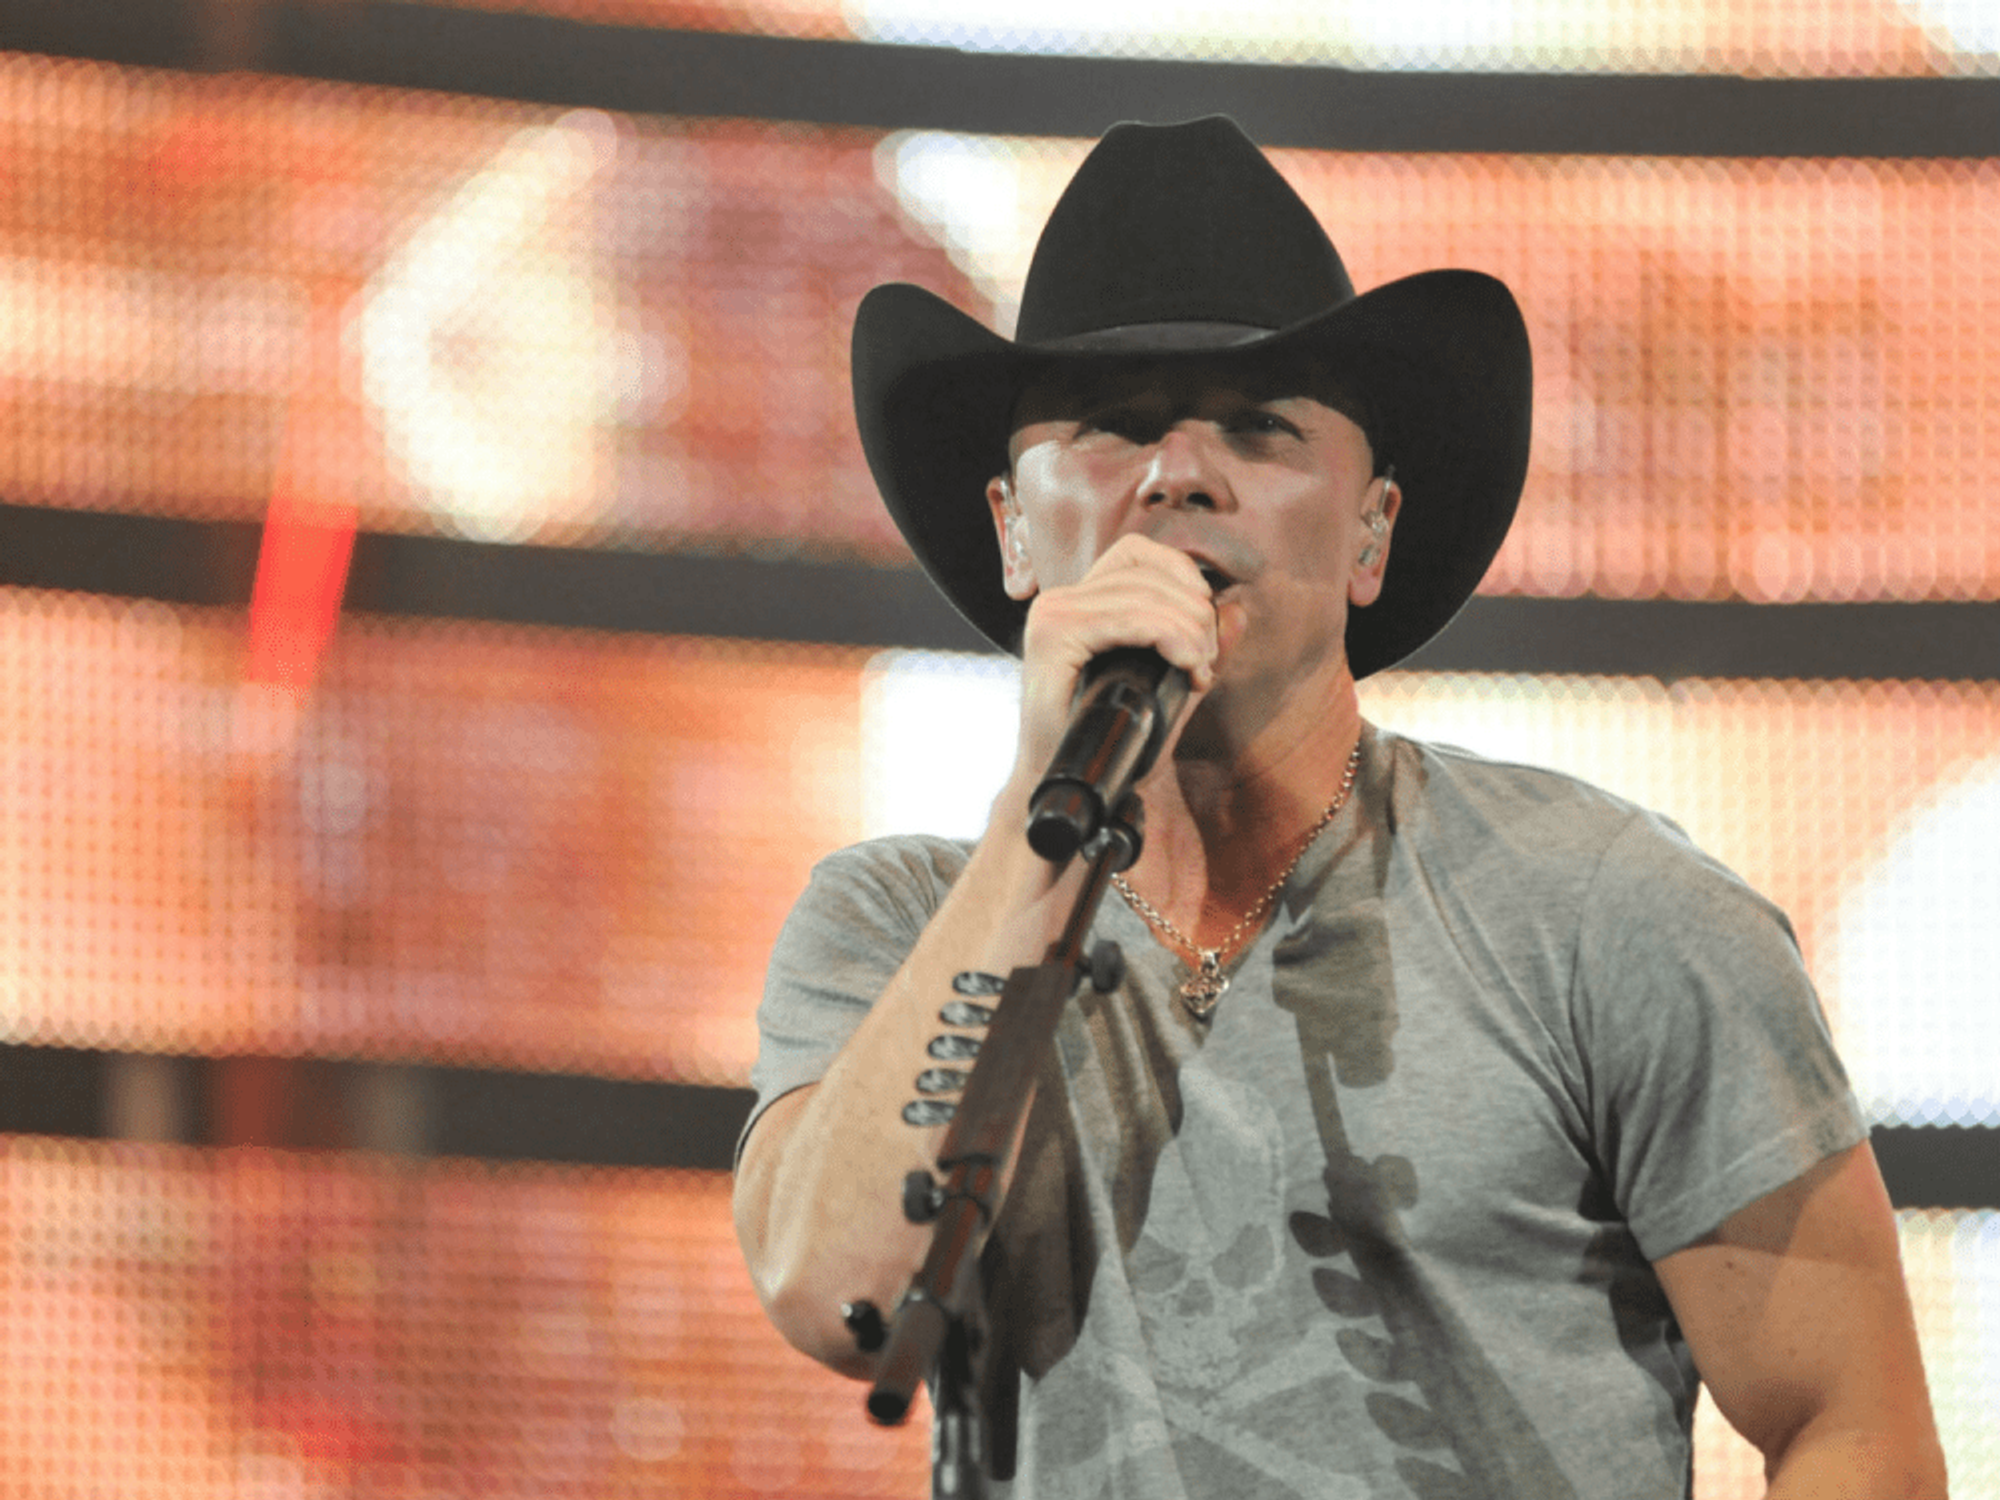 Kenny Chesney and Jason Aldean perform at AT&T Stadium on May 16.